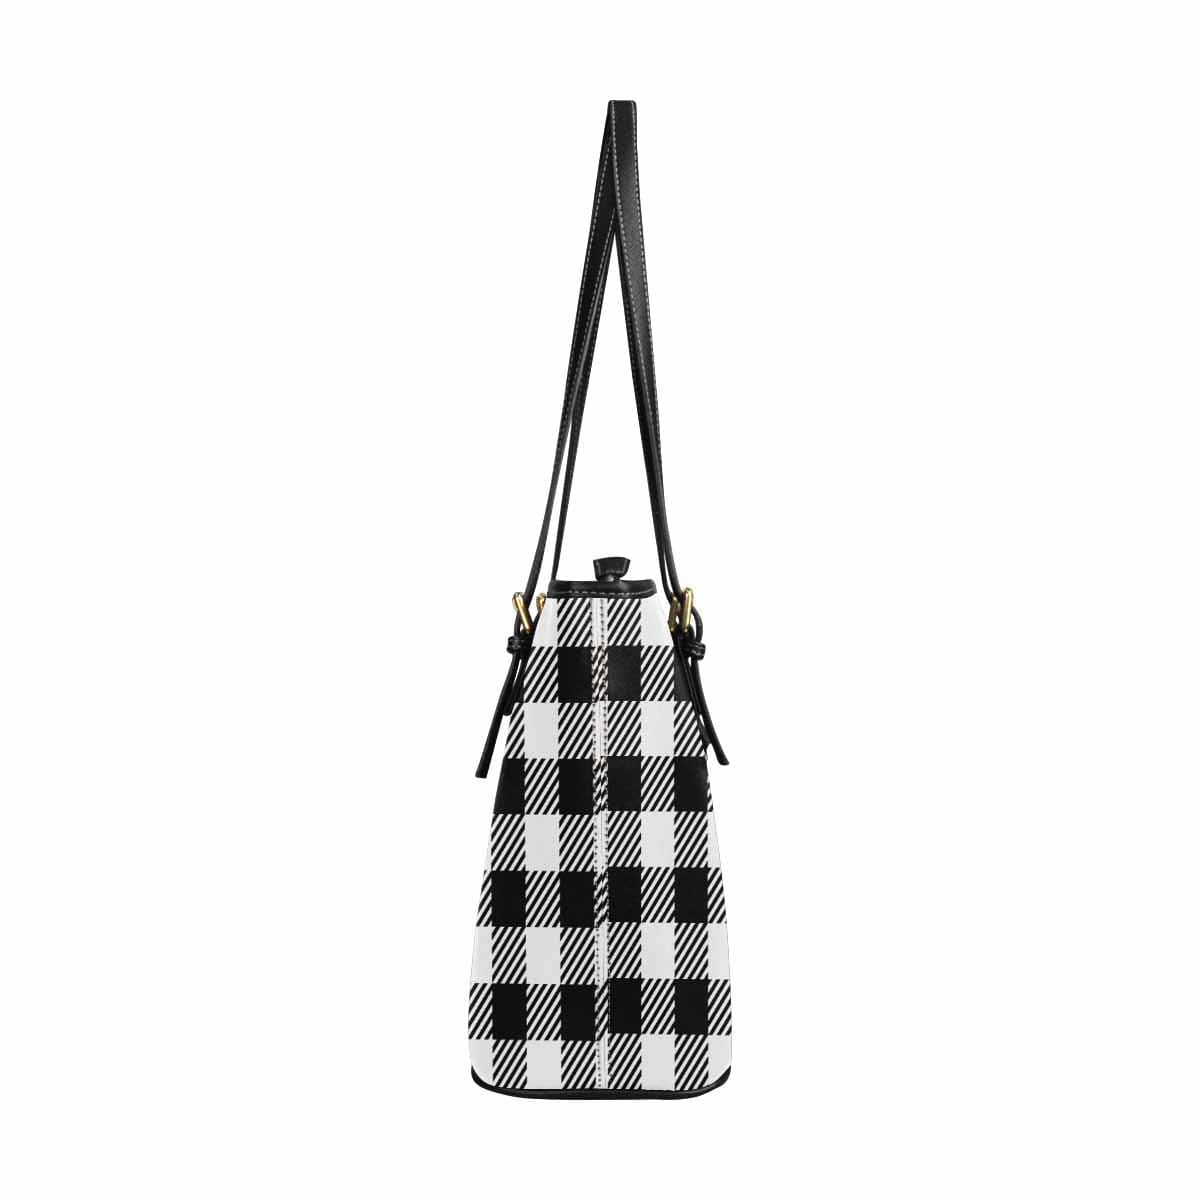 Large Leather Tote Shoulder Bag - Buffalo Plaid Black And White - Bags